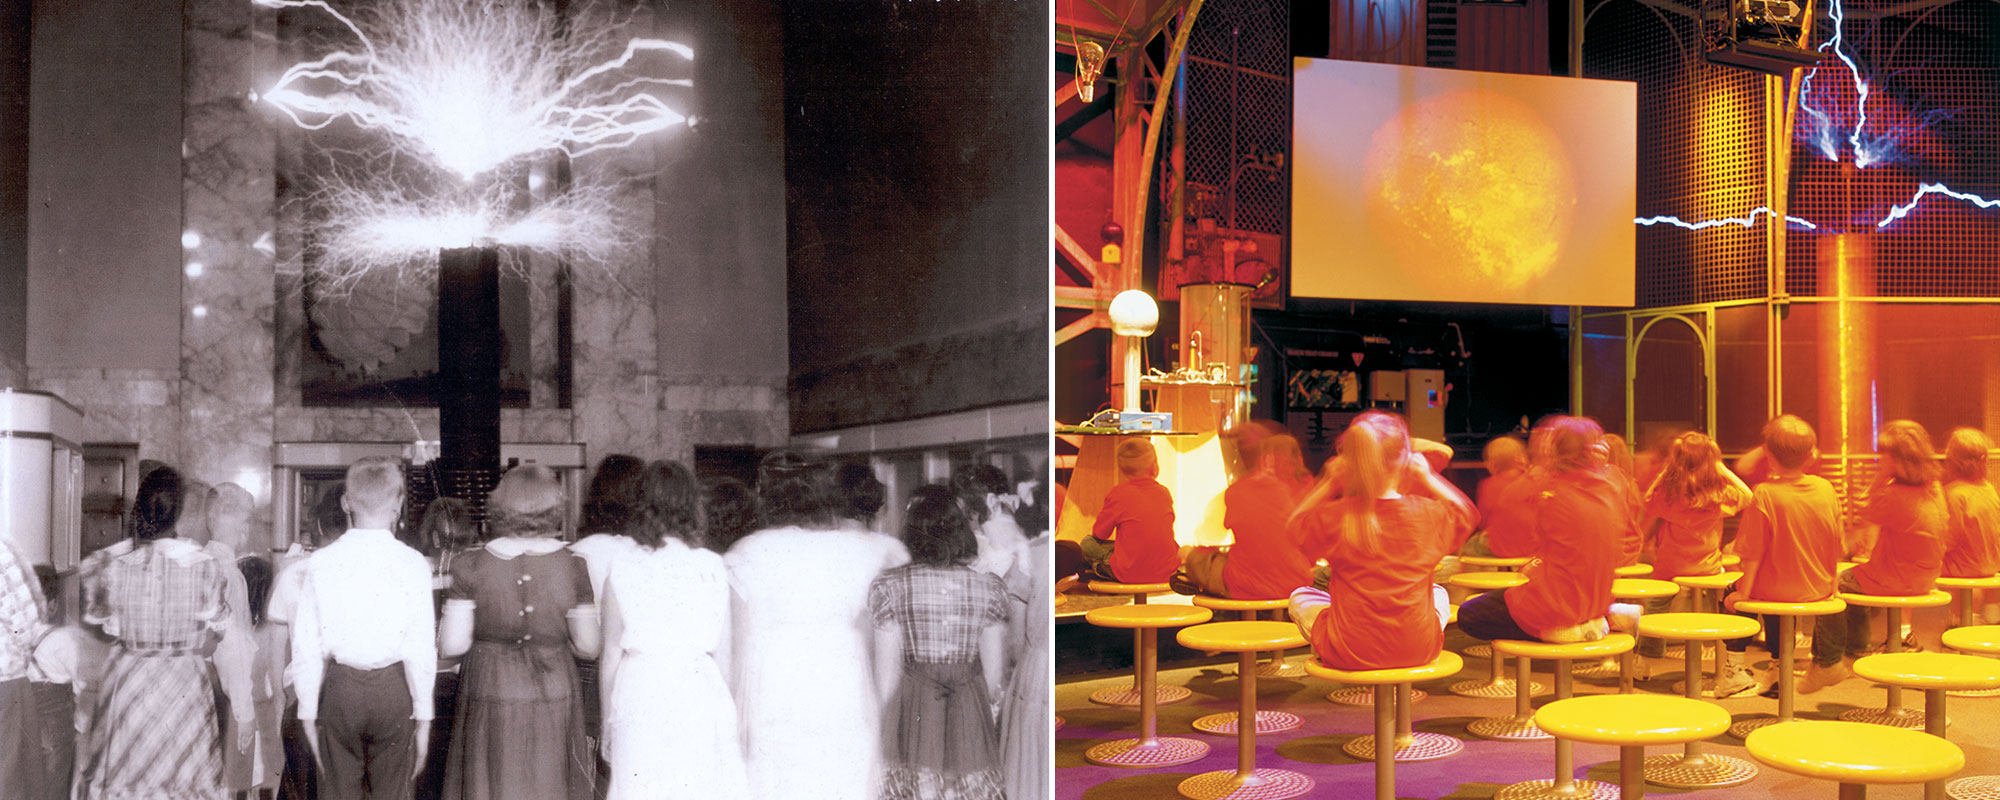 A vintage and current photo of the Tesla coil being watched by students.